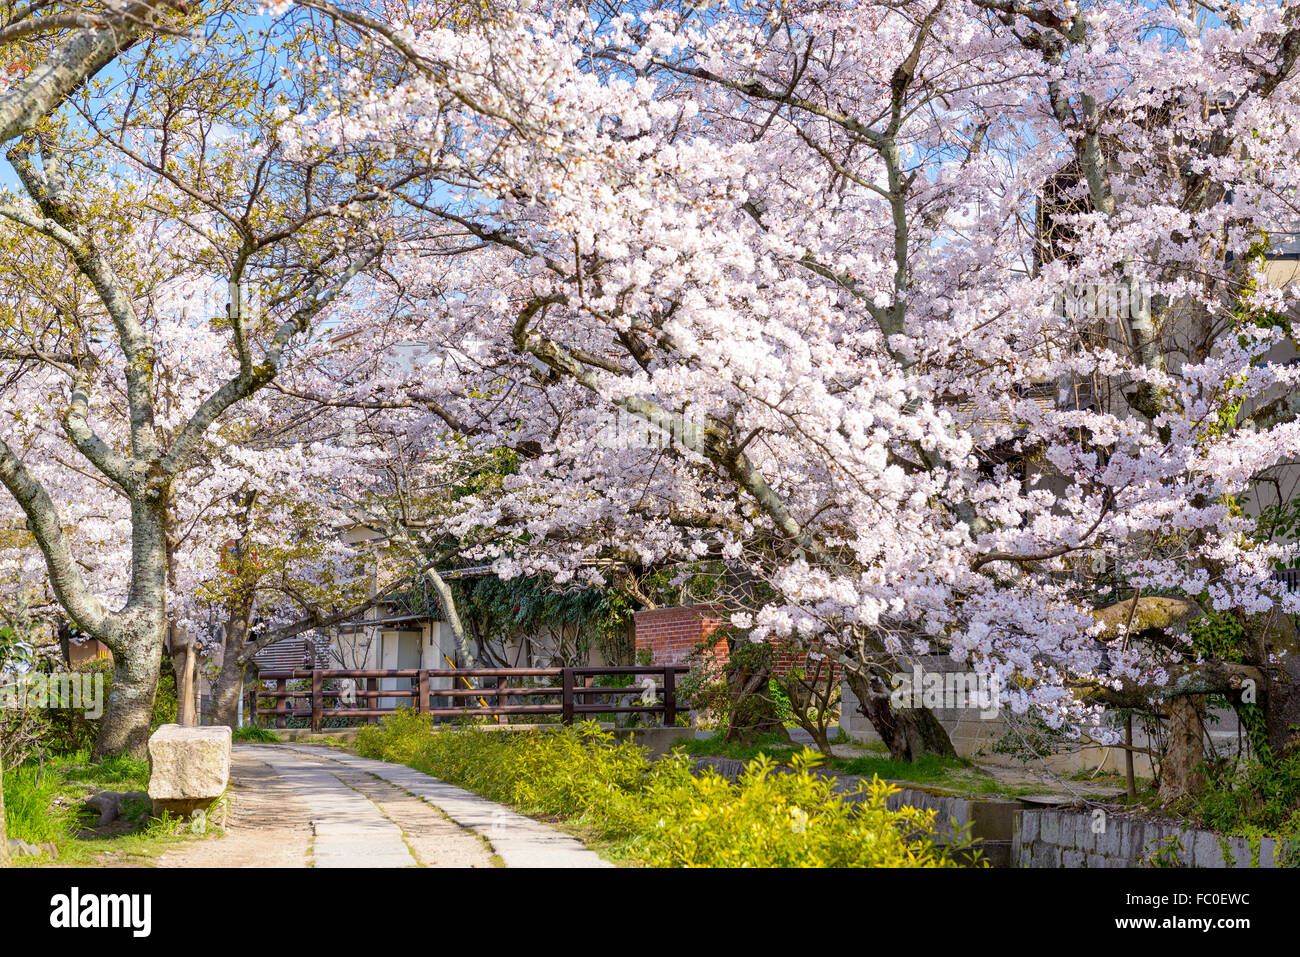 Kyoto, Japan at Philosopher's Walk in the Springtime. Stock Photo